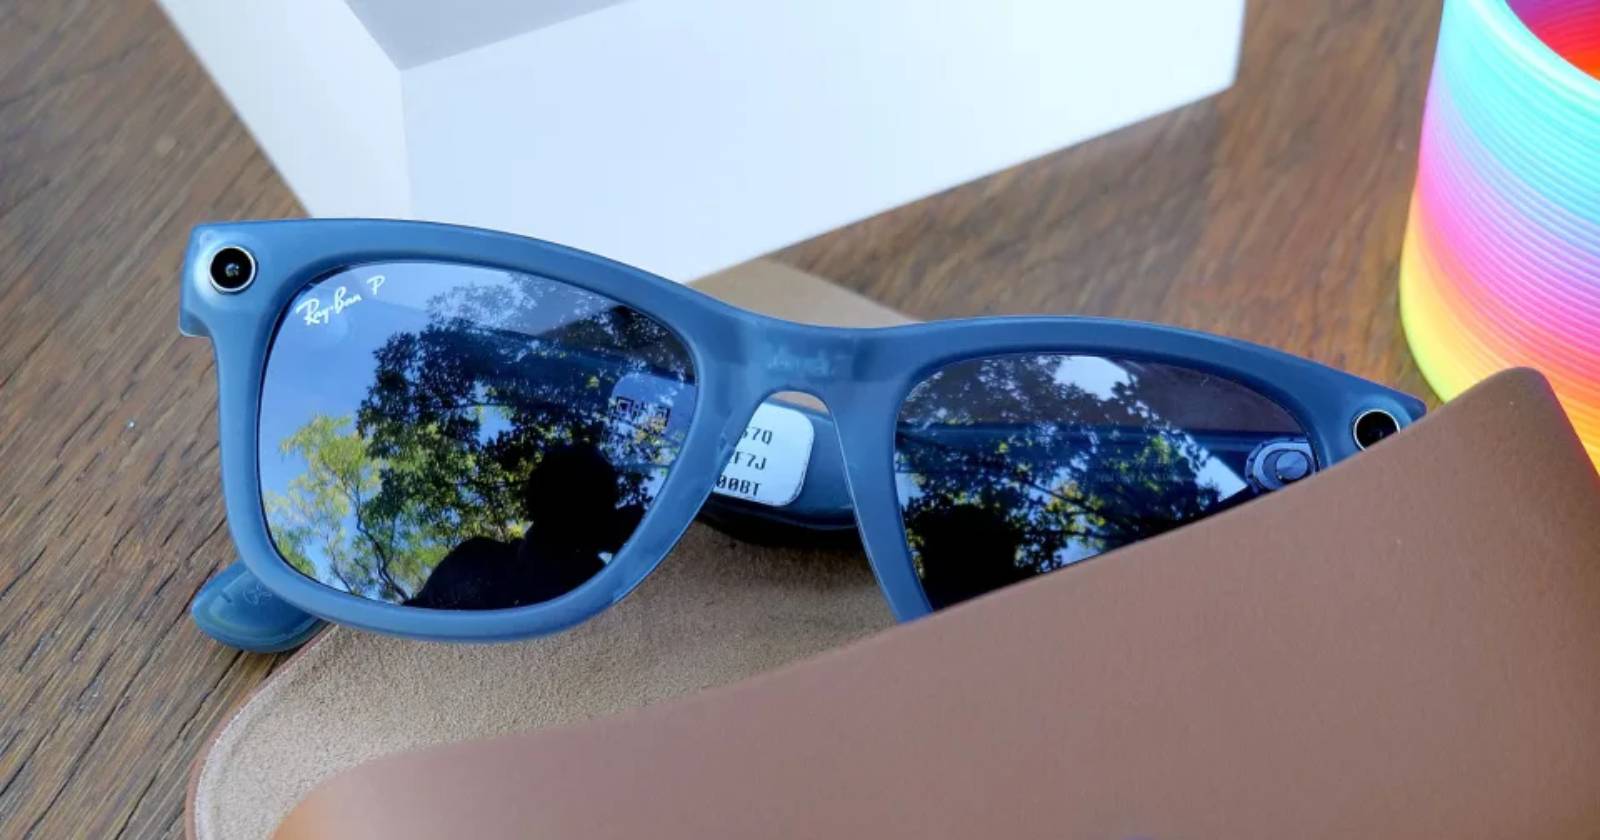 Glasses or Vlogging/action camera? Here are the new Ray-Ban Meta Smart Glasses!